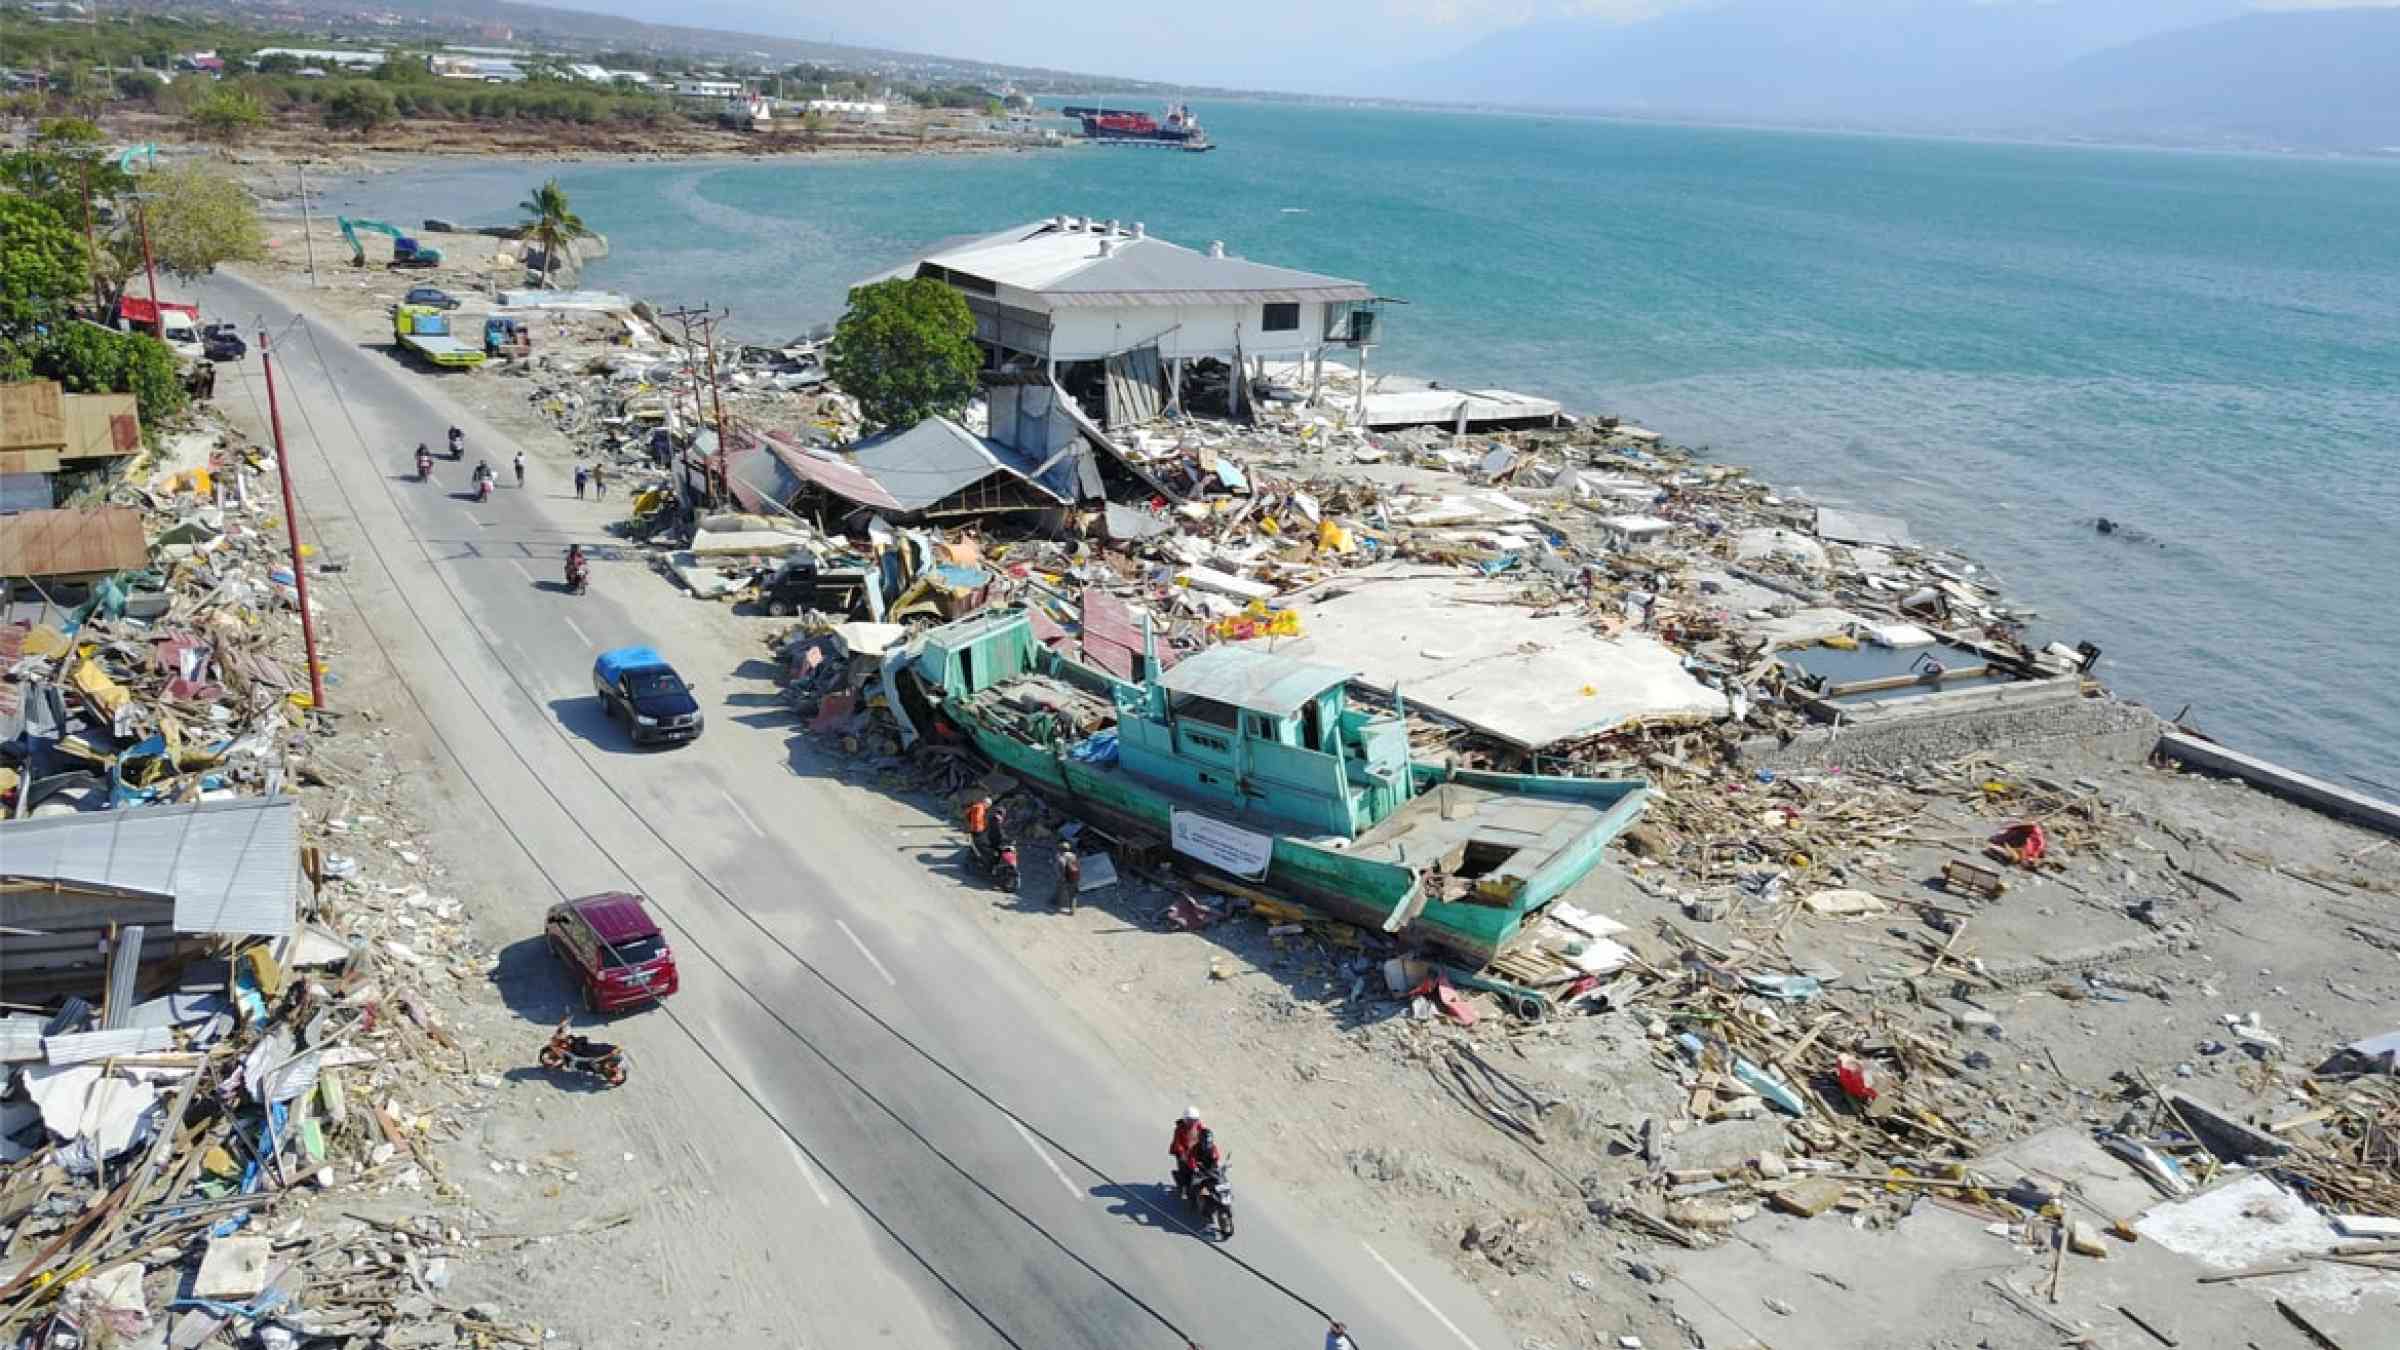 The impact of the tsunami that occurred along the Palu bay, Indonesia (2018)